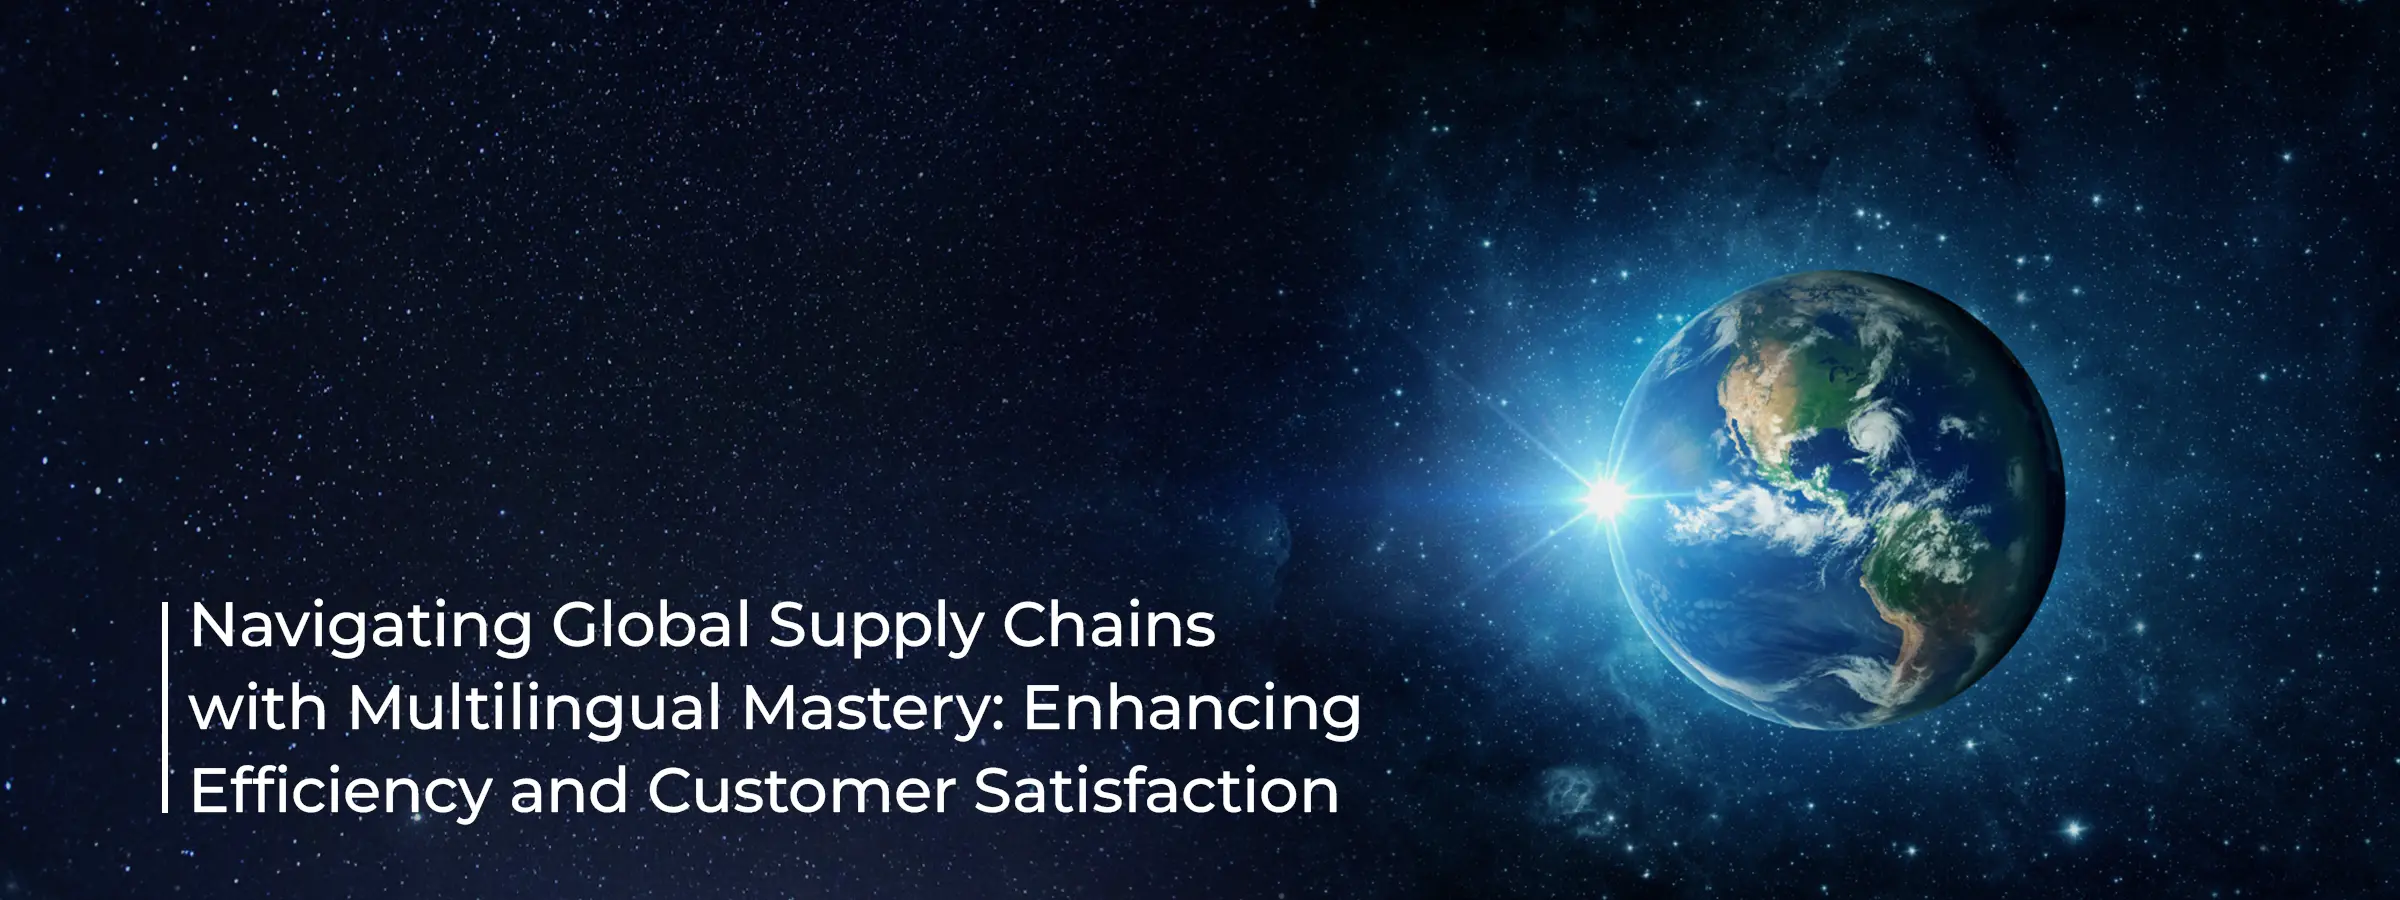 navigating-global-supply-chains-with-multilingual-mastery-enhancing-efficiency-and-customer-satisfaction